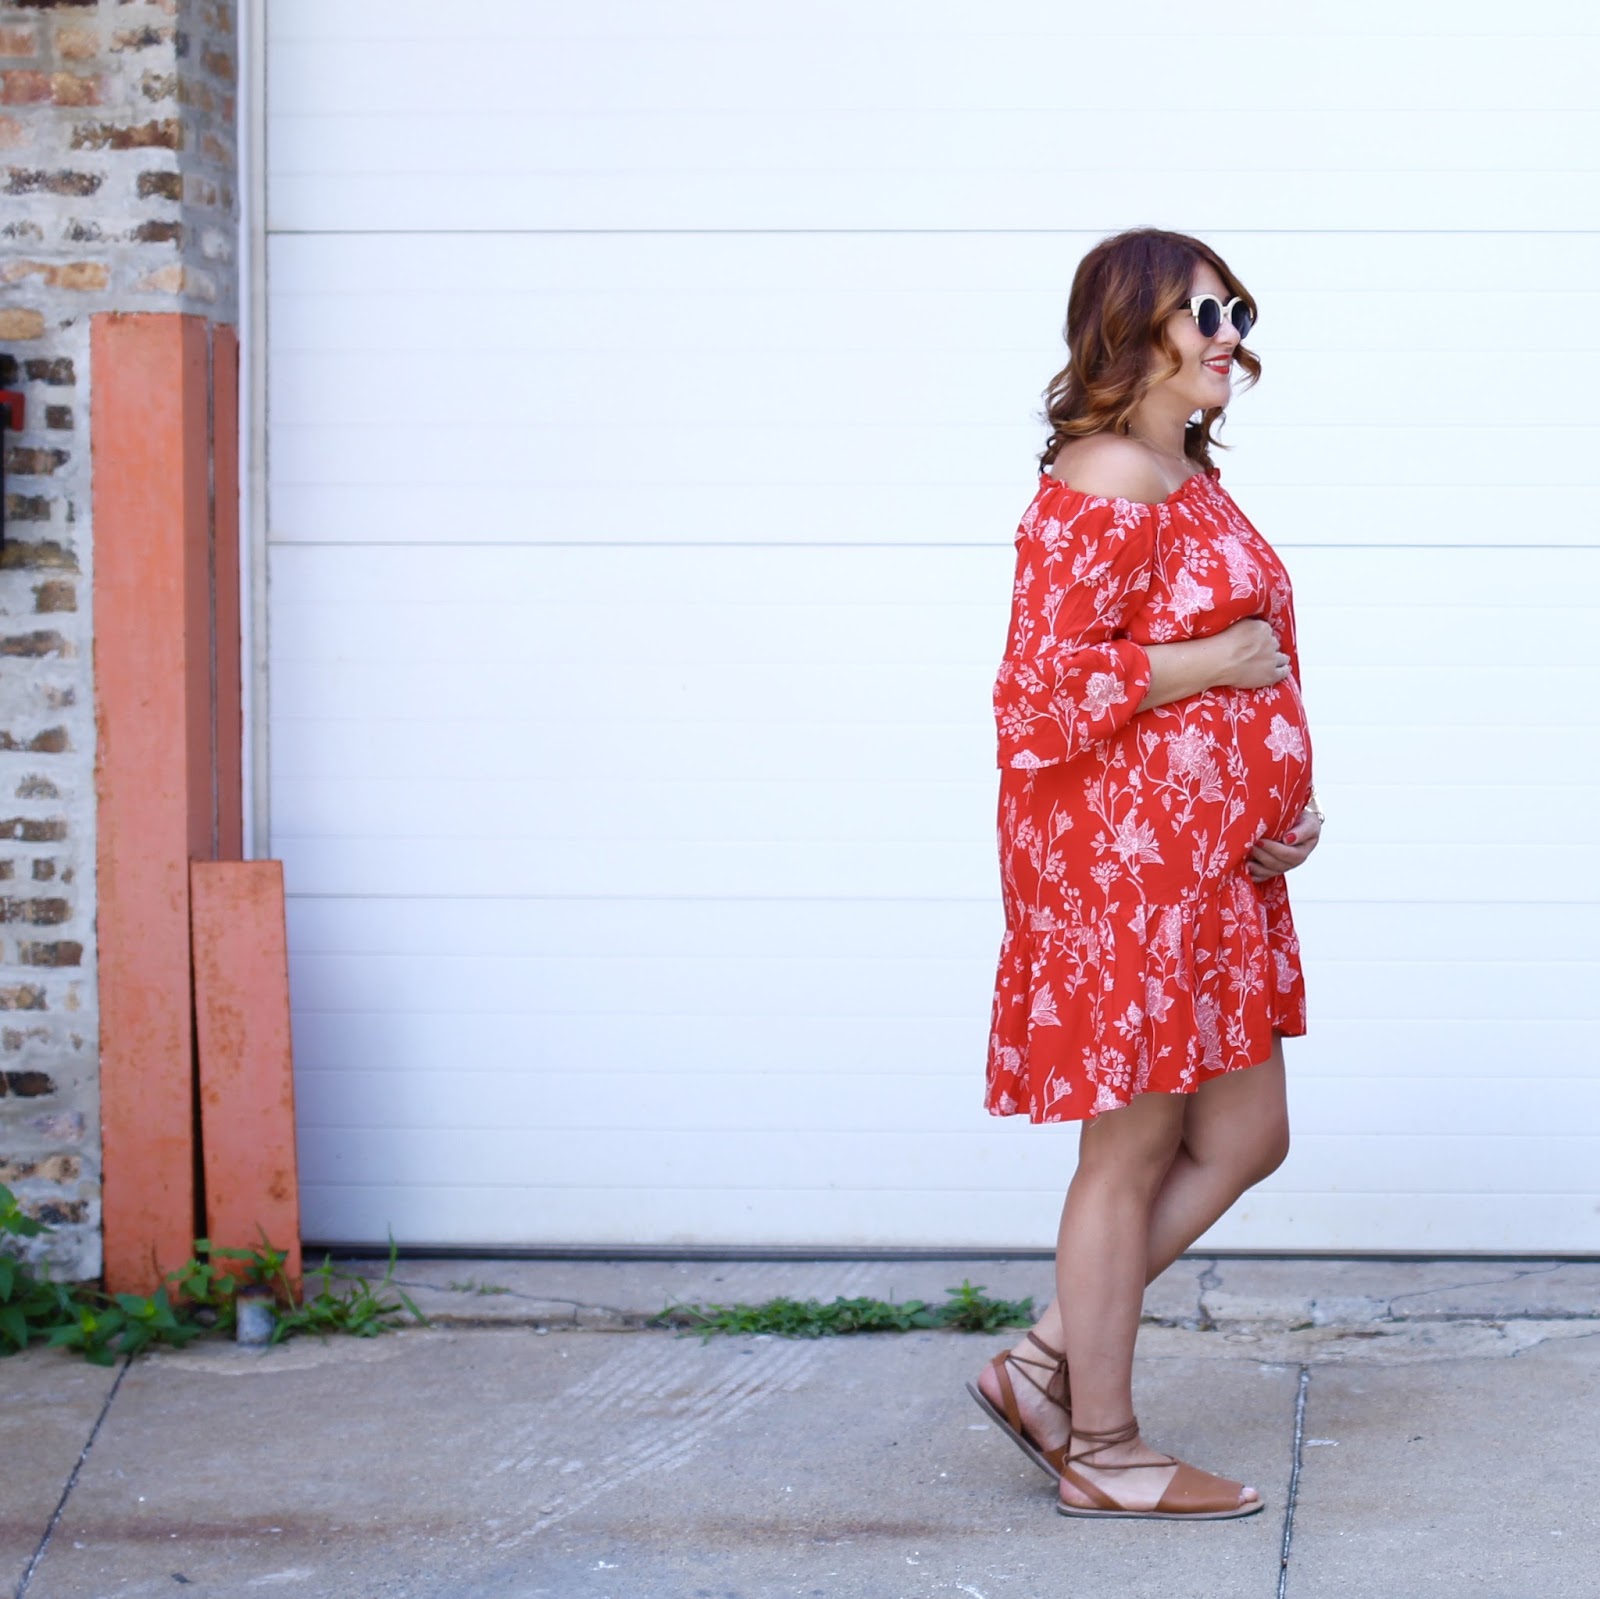 maternity style, red hair, off the shoulder, casual outfit